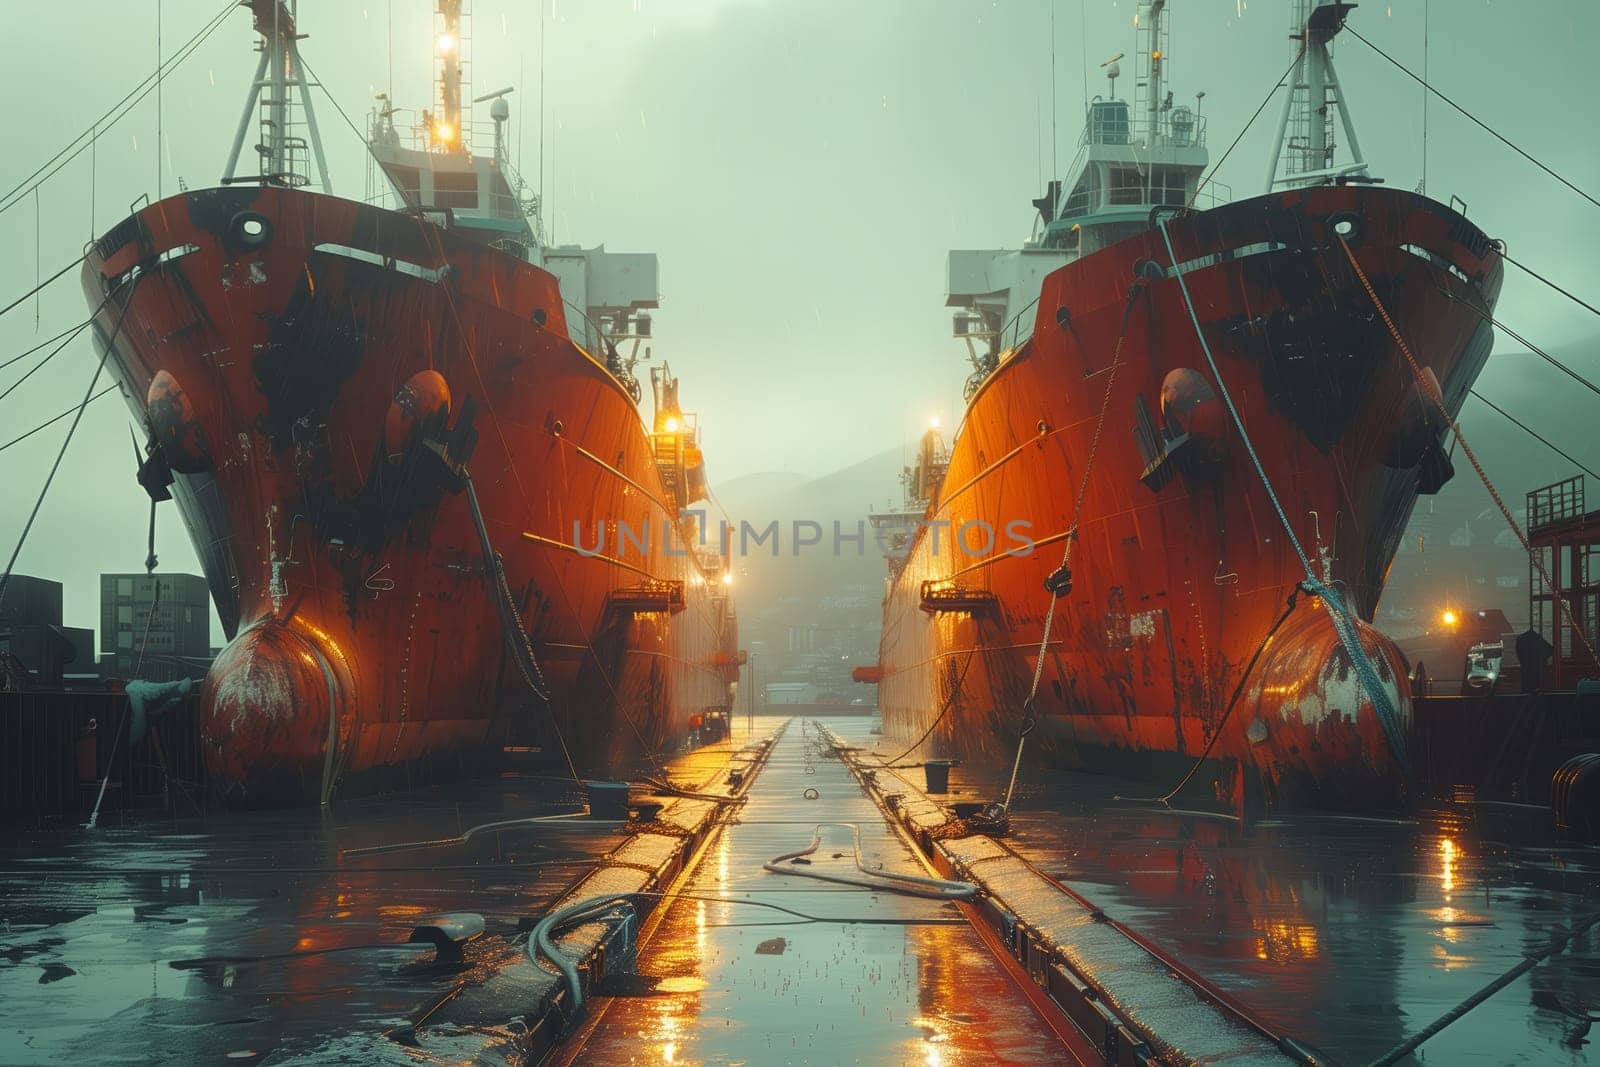 Two ships anchored in a harbor on a rainy day, under a cloudy sky by richwolf